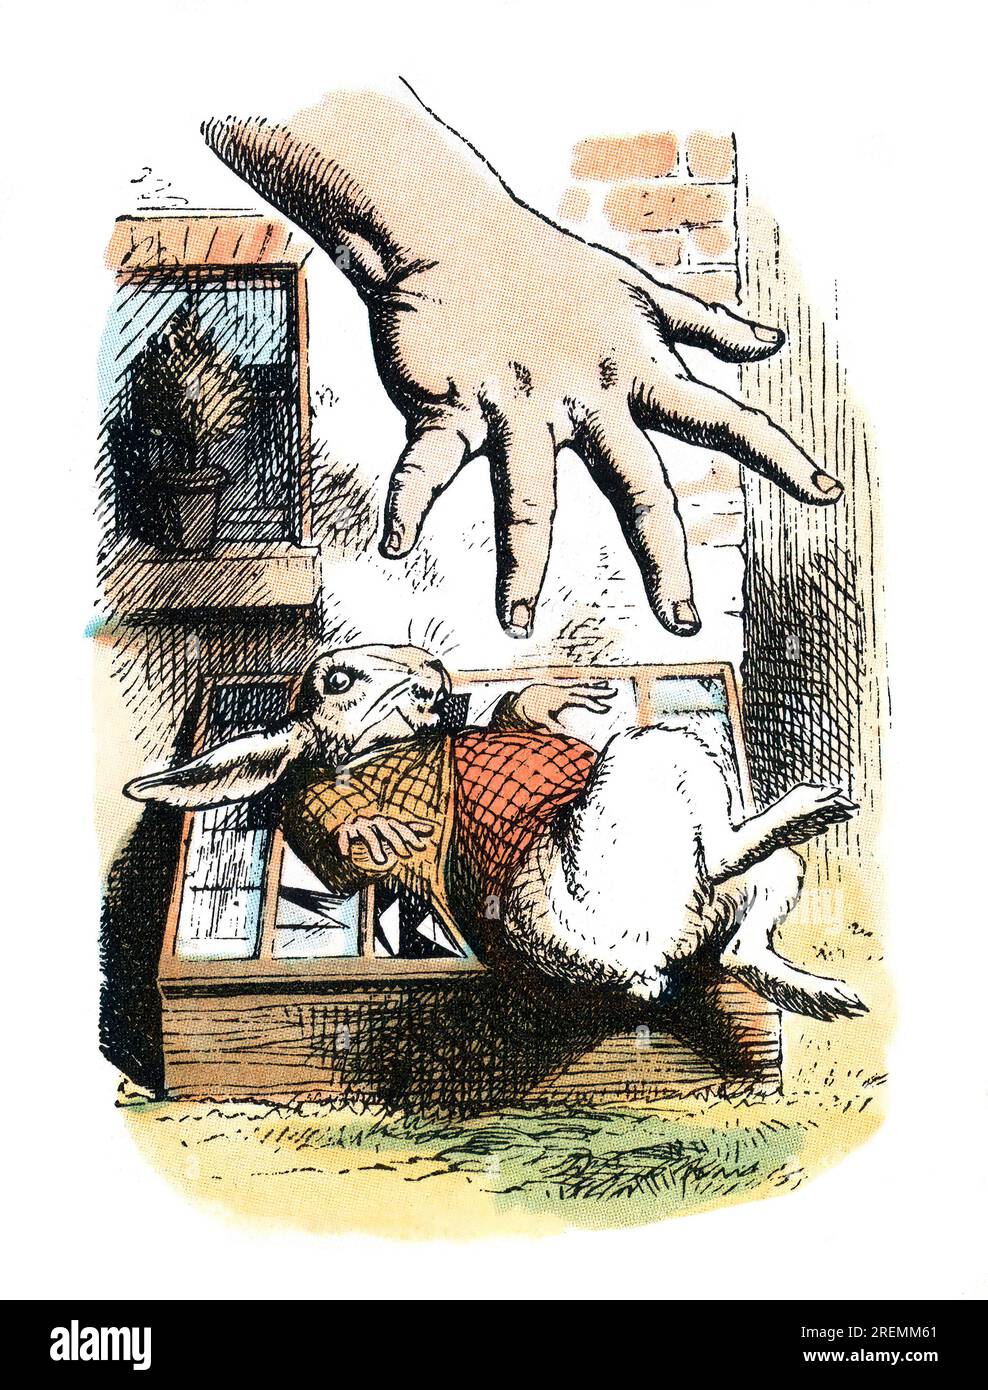 Giant Hand reaching for white rabbit Alice in Wonderland colored Tenniel illustration Stock Photo